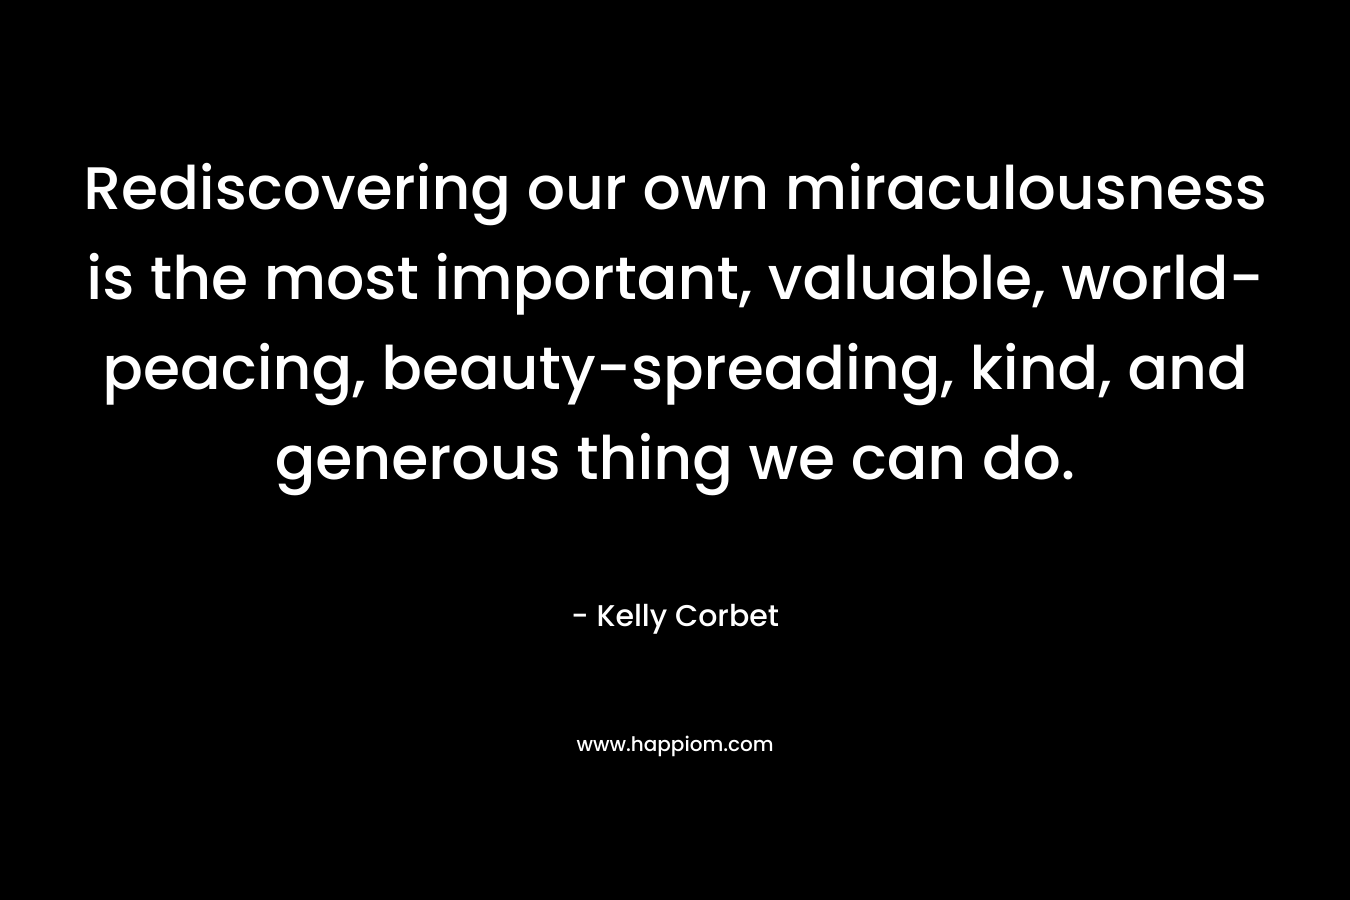 Rediscovering our own miraculousness is the most important, valuable, world-peacing, beauty-spreading, kind, and generous thing we can do.